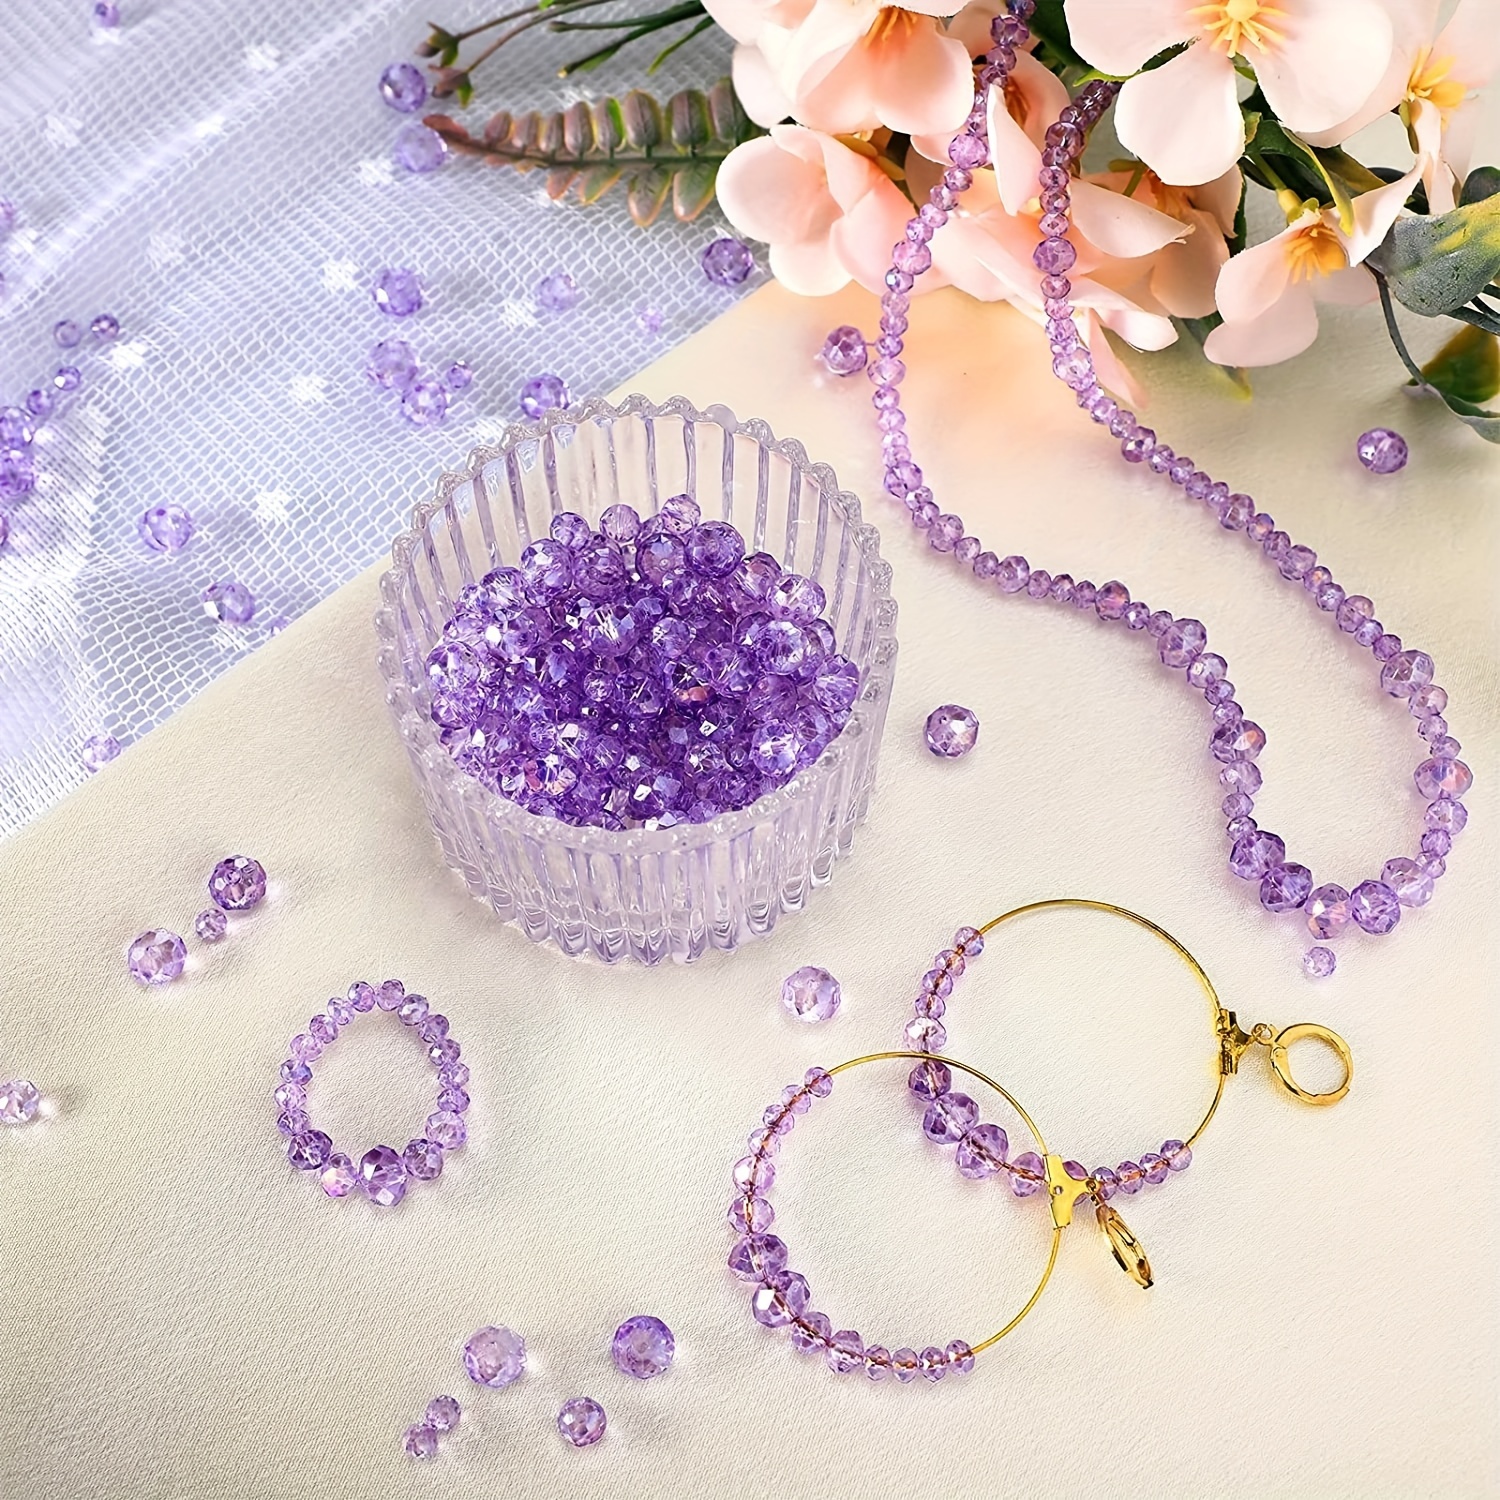 600 Pcs Glass Beads for Jewelry Making, Assorted Crystal Rondelle Beads  with Box - 4/6/8mm, AB Color